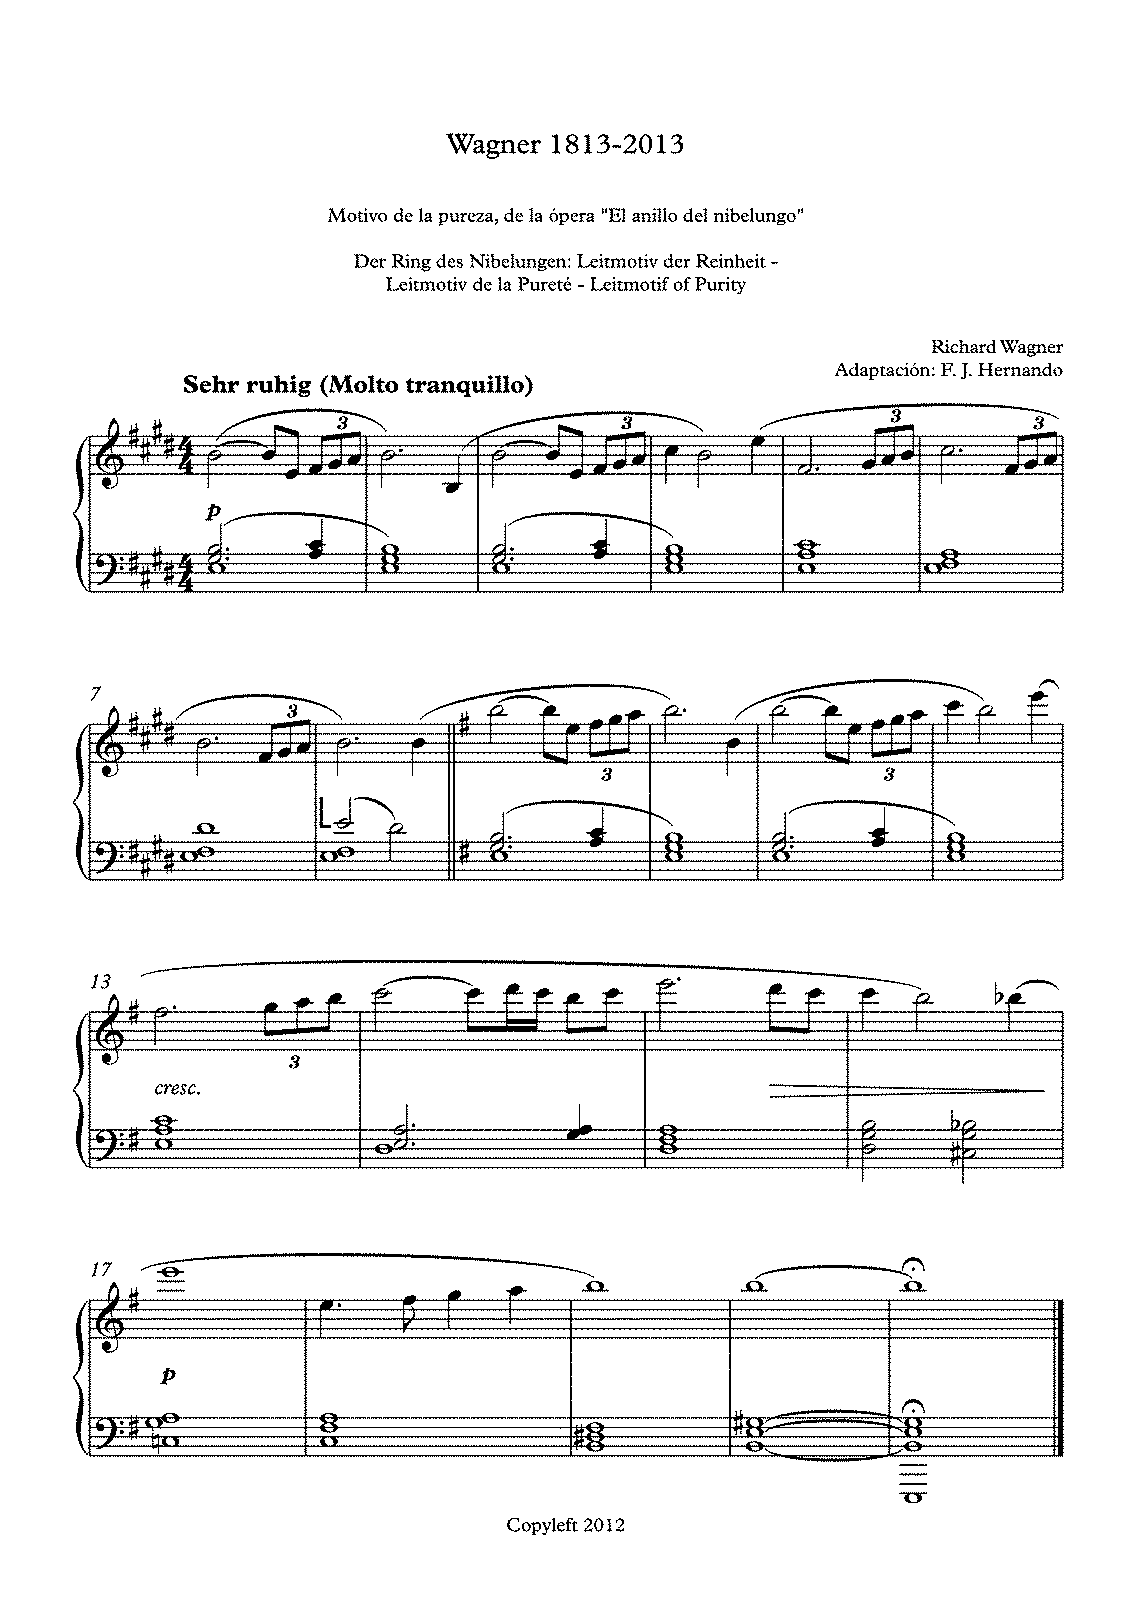 Wagner for Young Pianists (Wagner, Richard) - IMSLP: Free Sheet Music